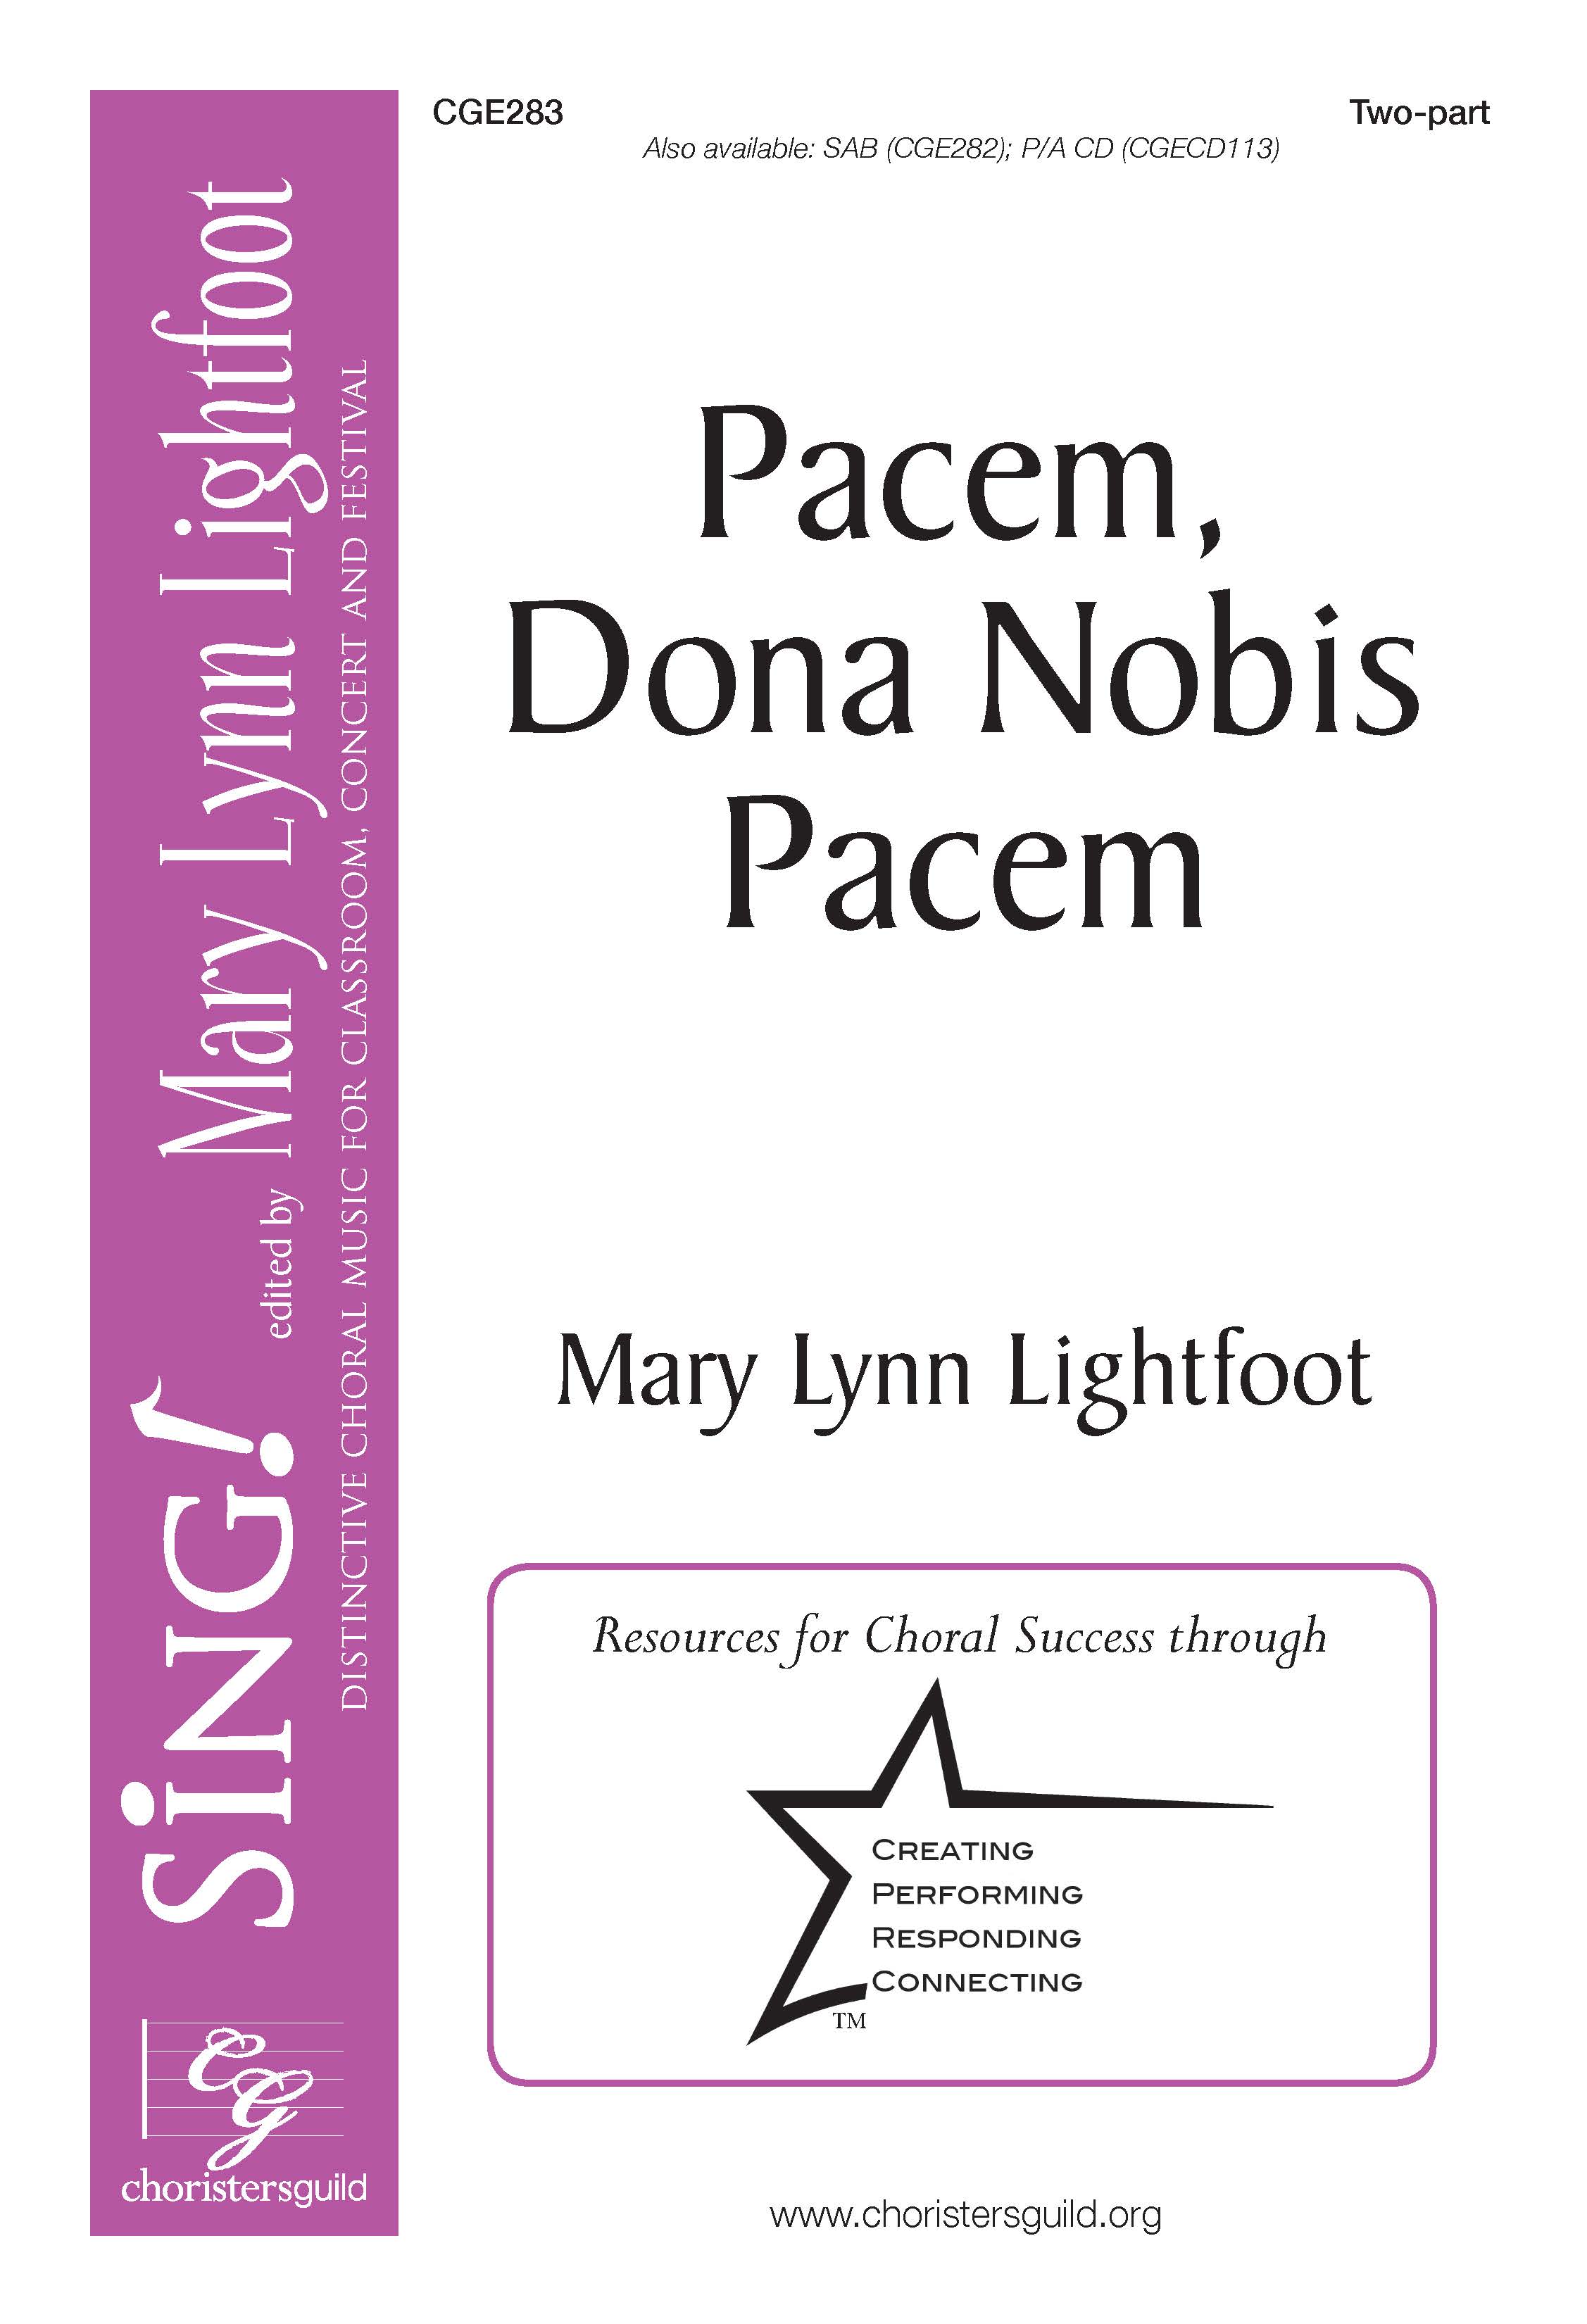 Pacem, Dona Nobis Pacem Two-part